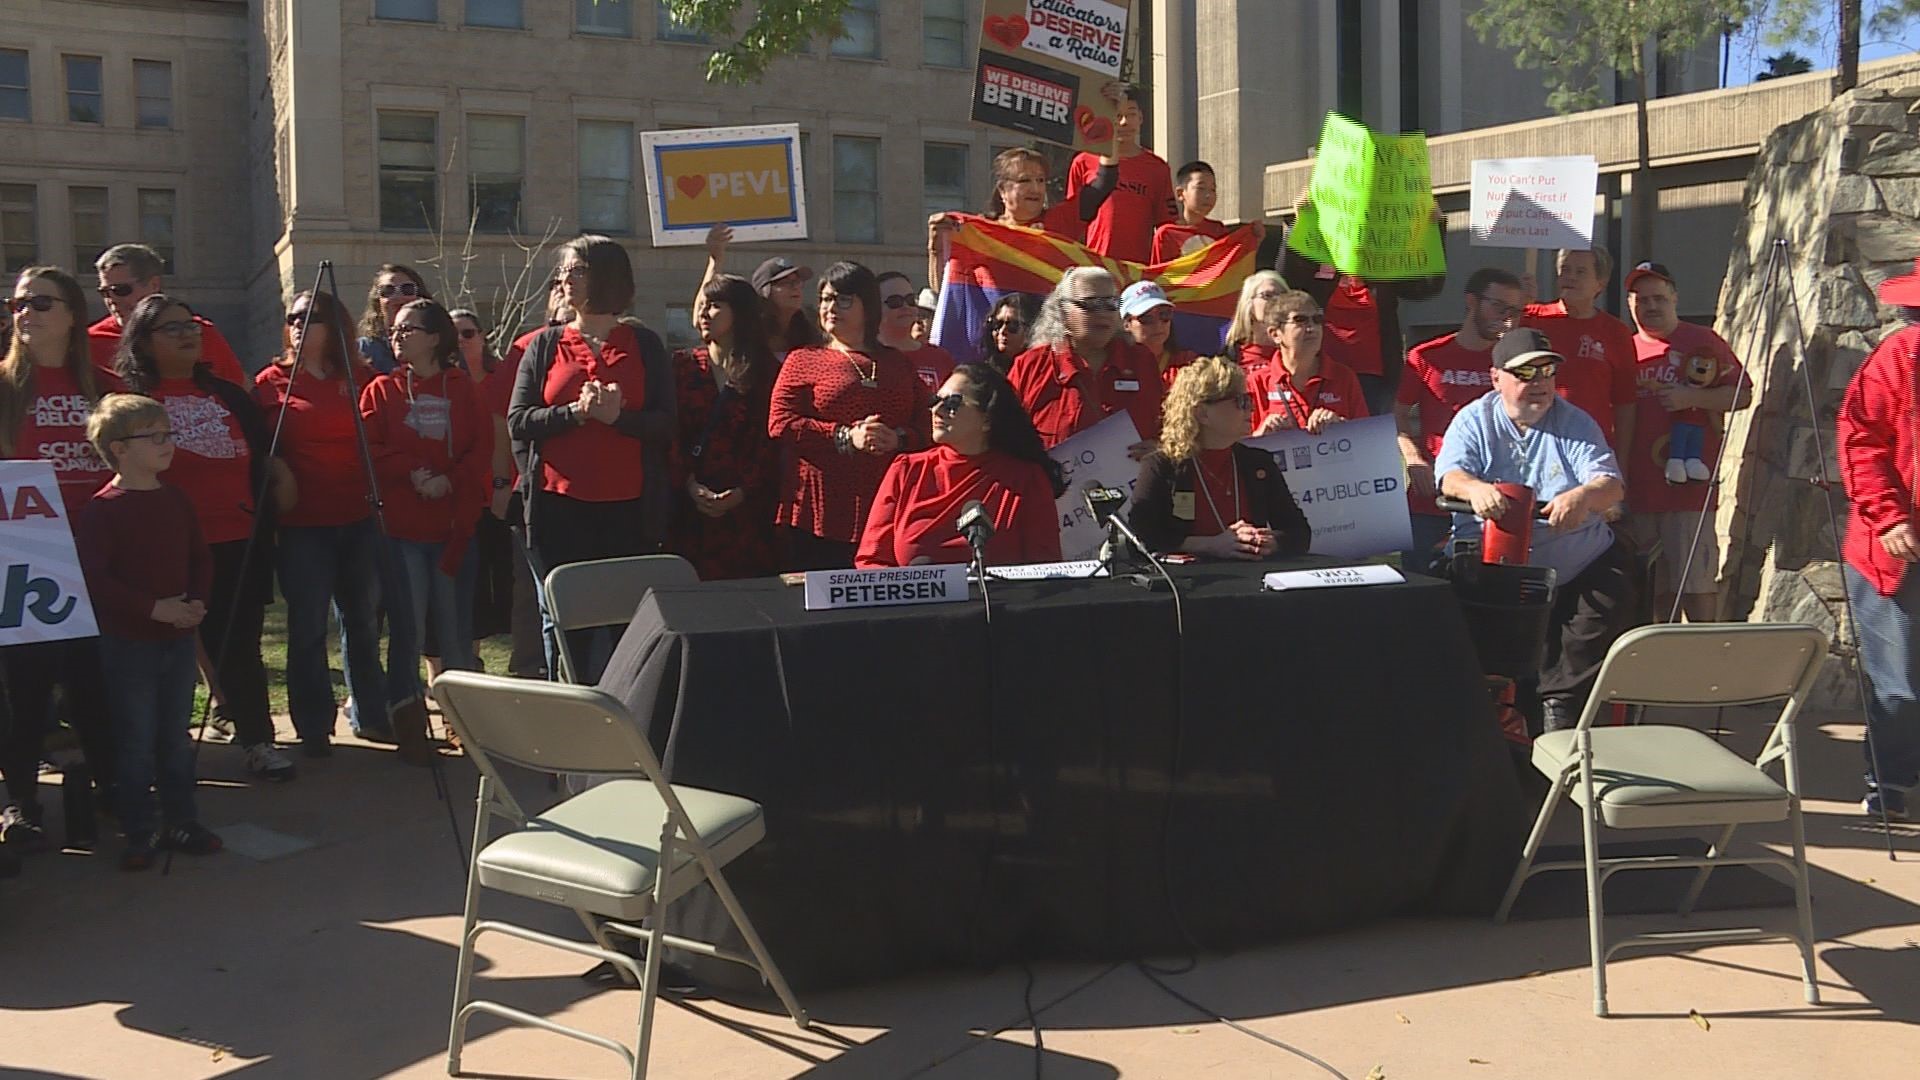 Two dozen Arizona educators gathered Monday at a metaphorical “negotiating table” outside the state capitol, asking for Republican leaders to meet with them.